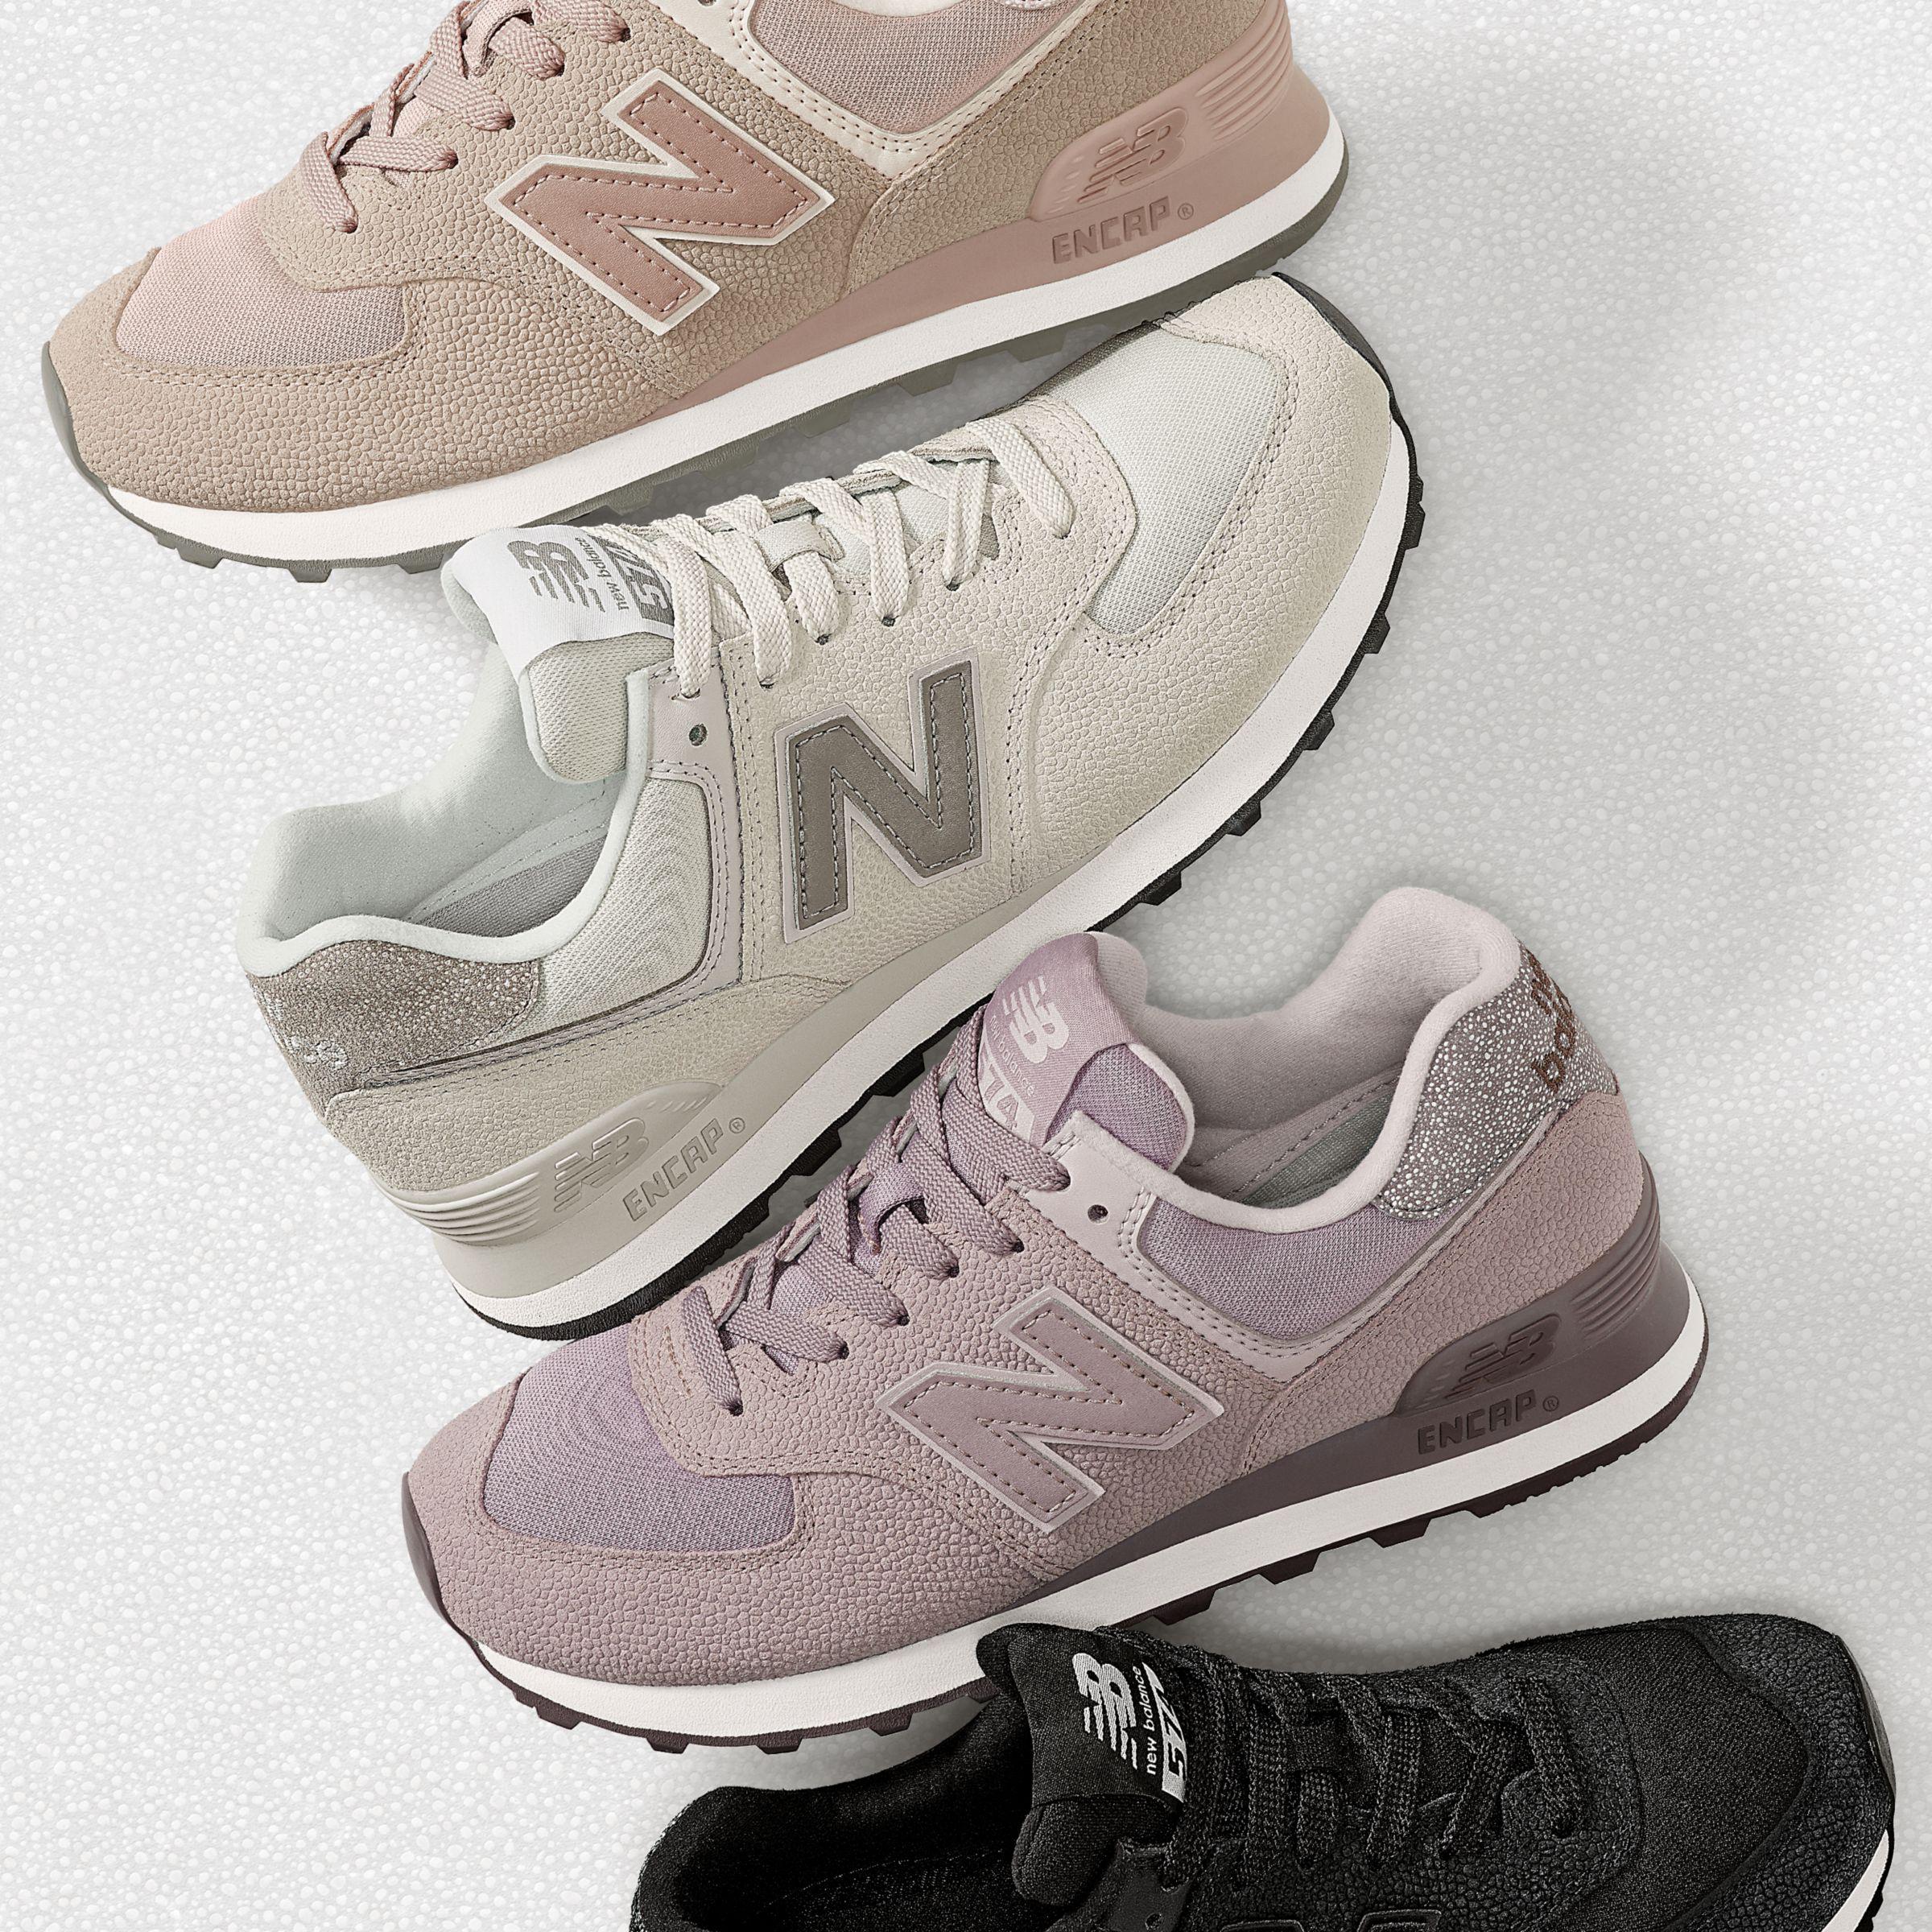 New Balance Suede 574 Pebbled Street - Lyst